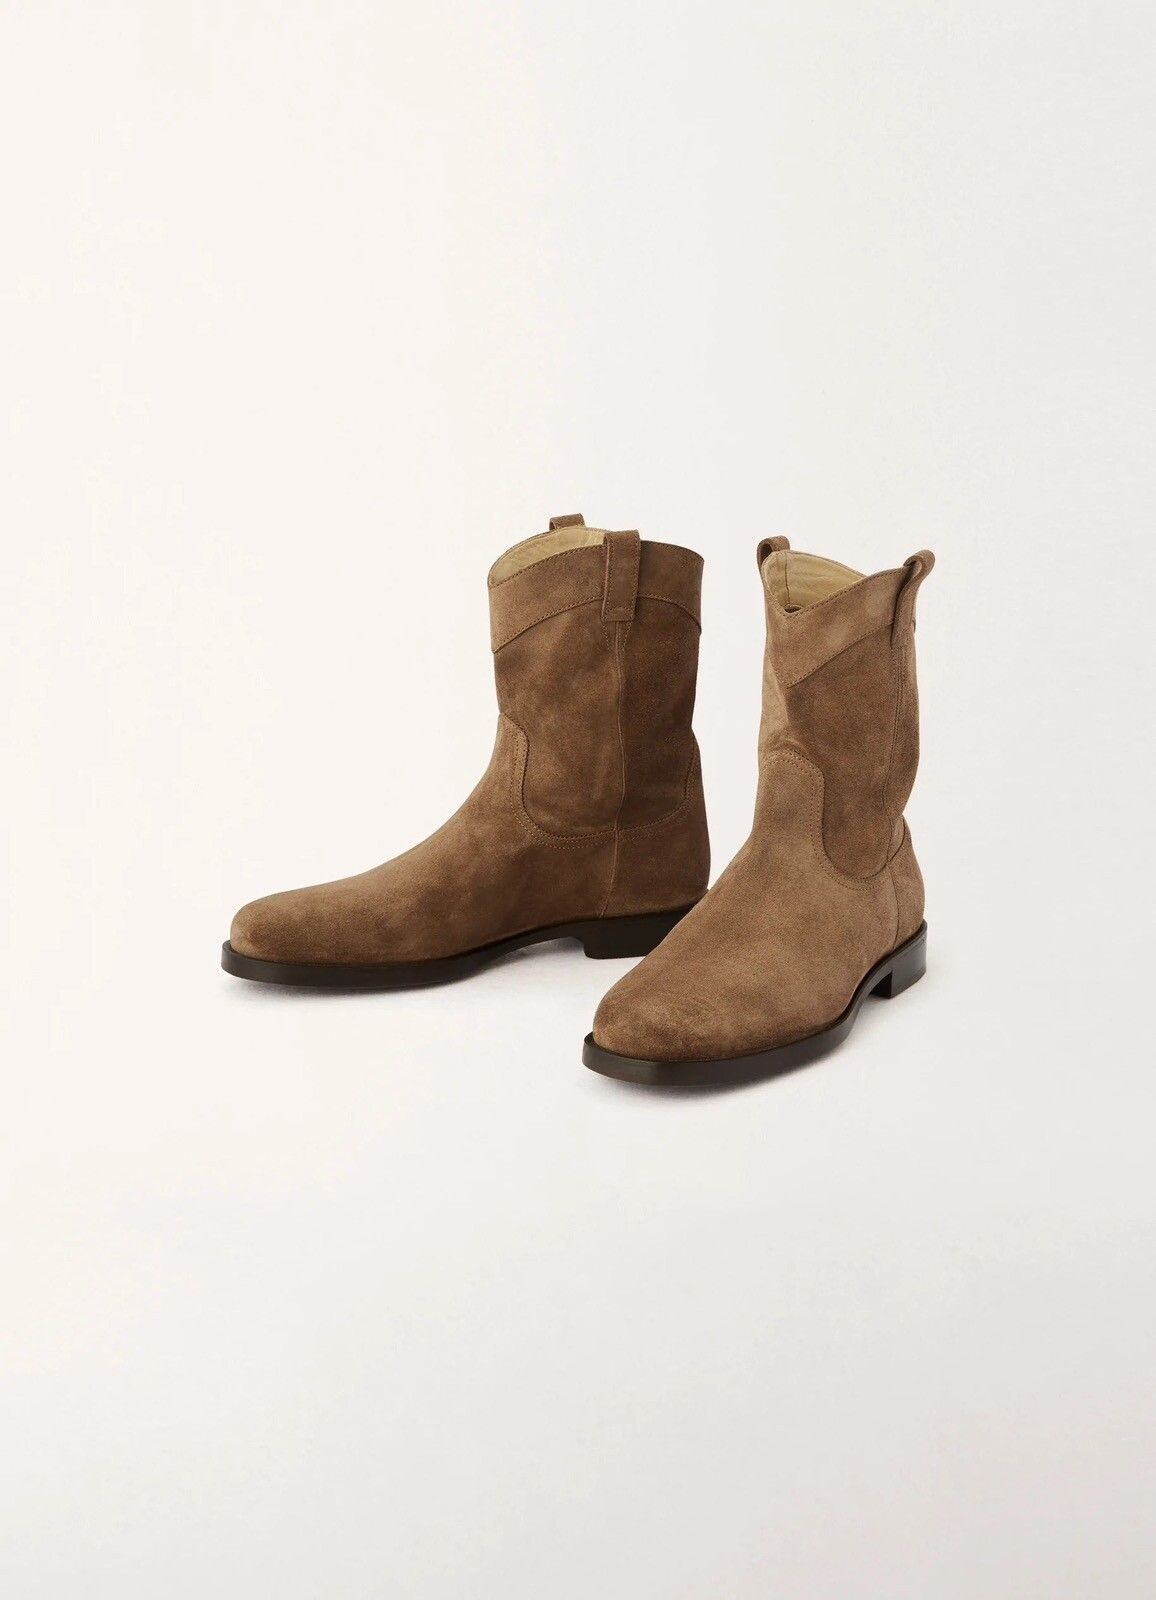 Lemaire Western Boots in Otter Suede | Grailed